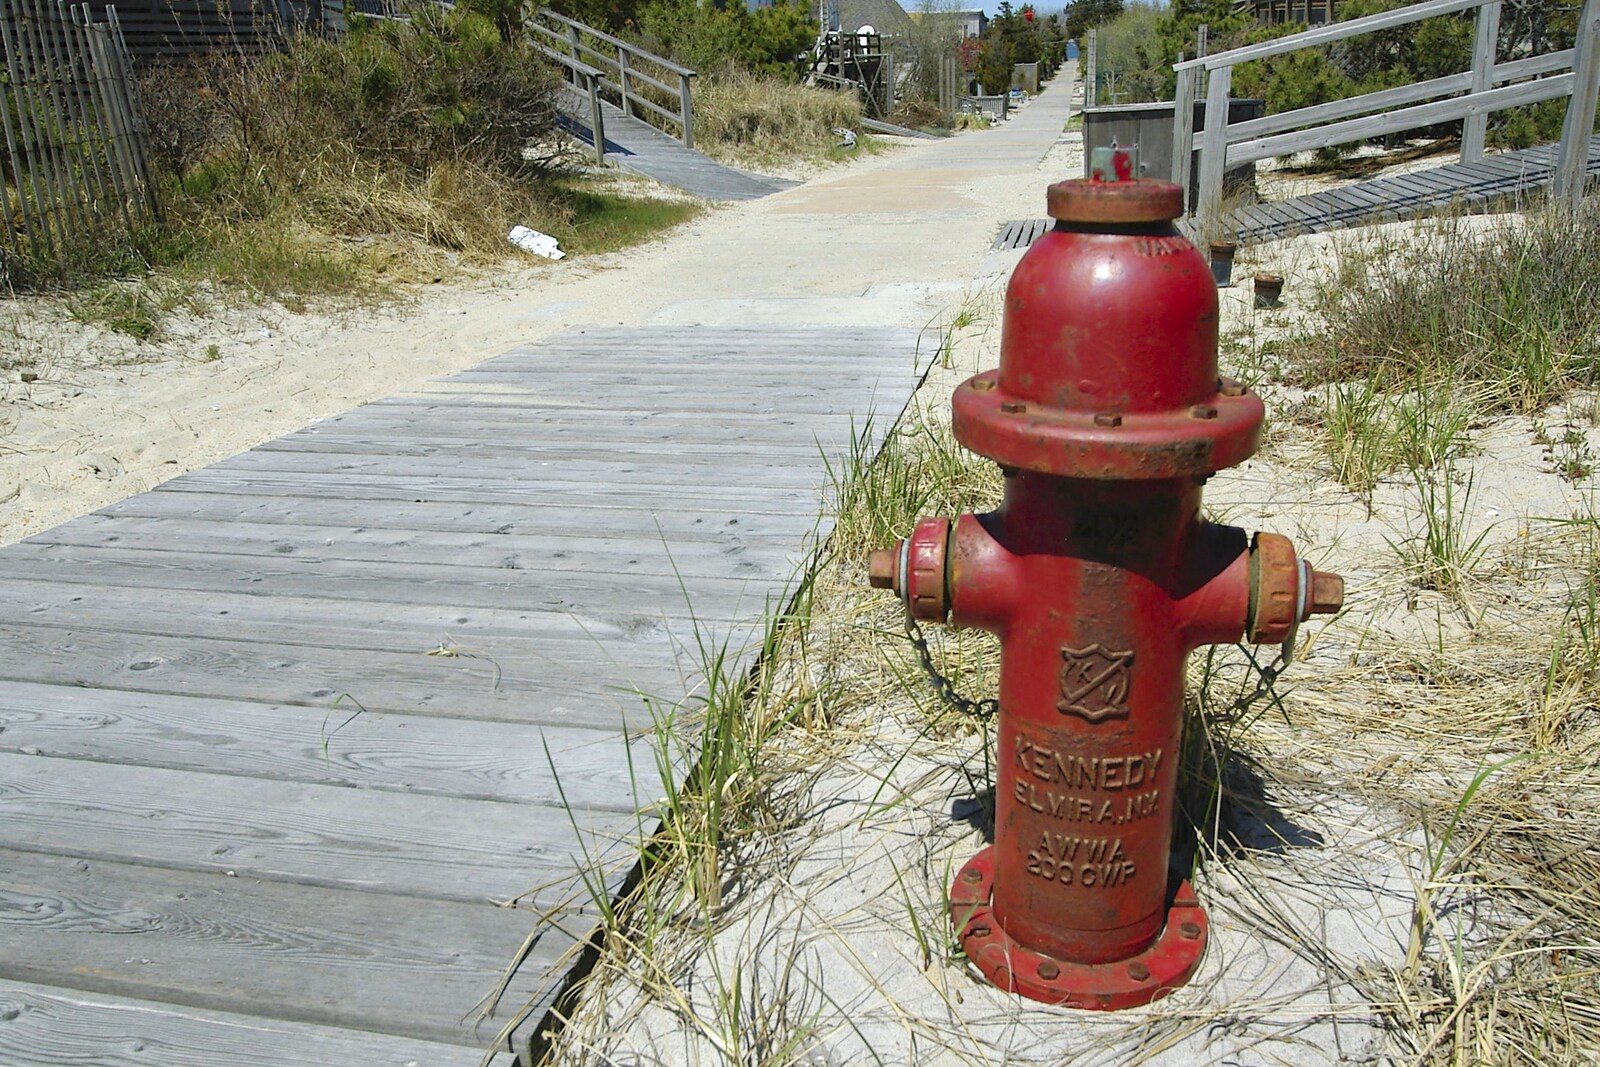 A Fire Island fire hydrant from Phil and the Fair Harbor Fire Engine, Fire Island, New York State, US - 30th April 2006